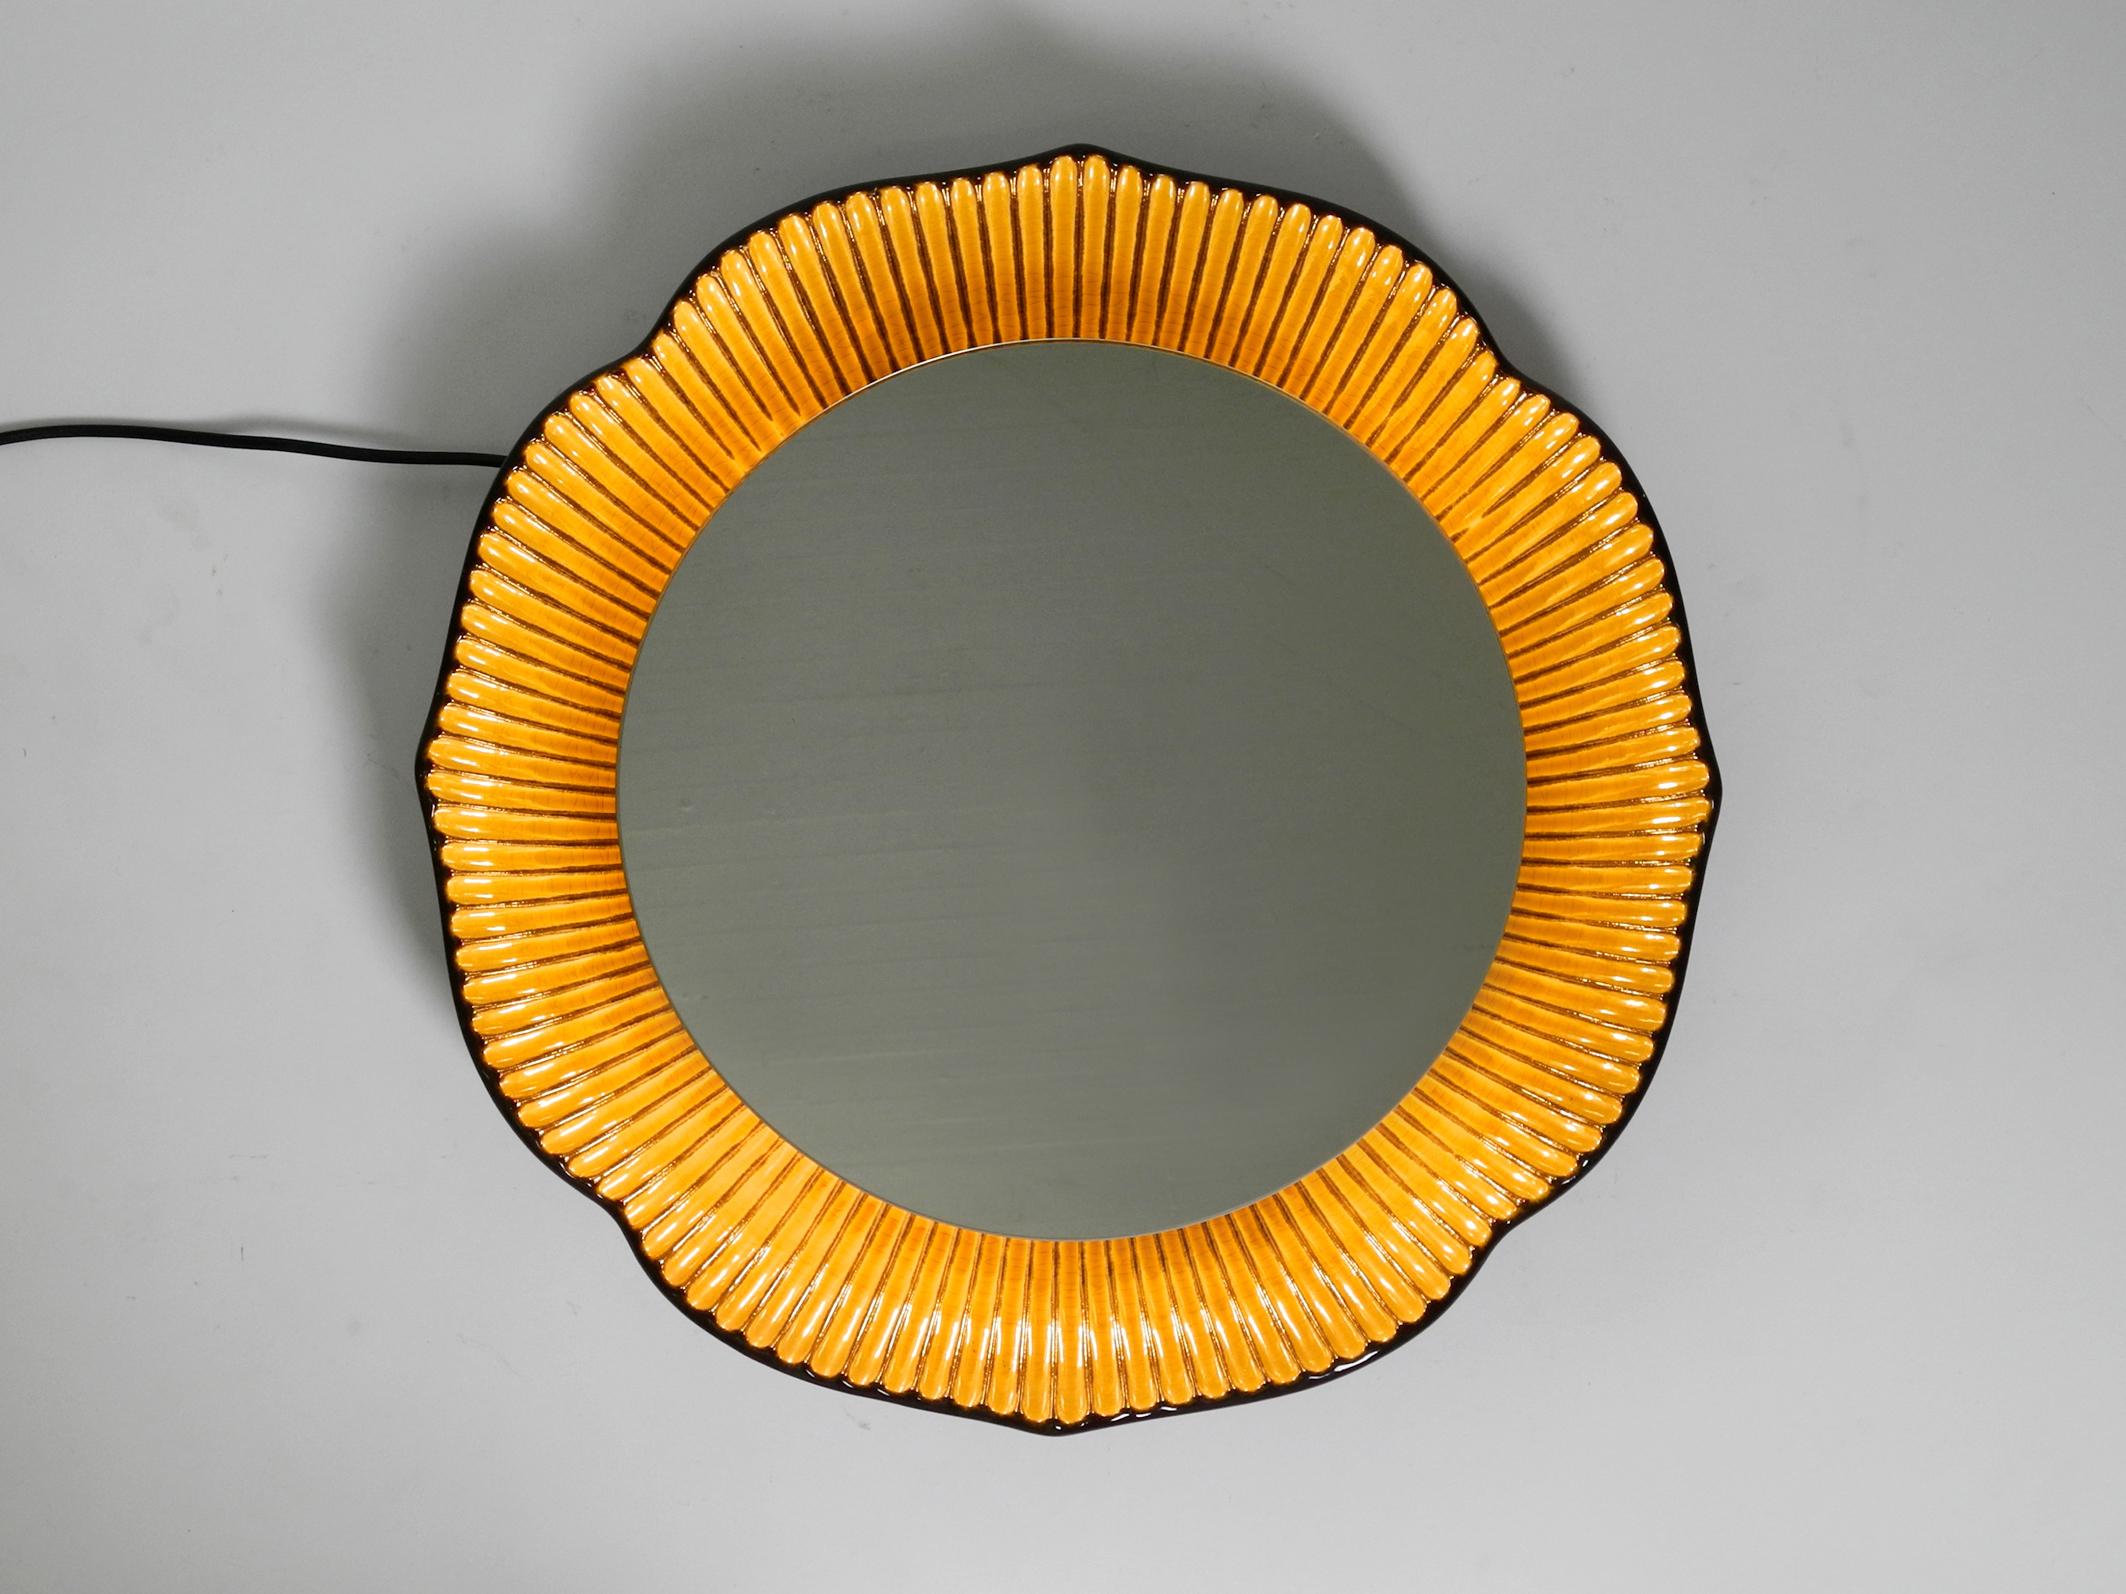 Large very beautiful illuminated ceramic wall mirror.
Extraordinary design made of ceramic coloured in brown and mustard-yellow.
Manufactured in the 1970s.
Very elaborately processed with many beautiful details. Minimalist design. Made in